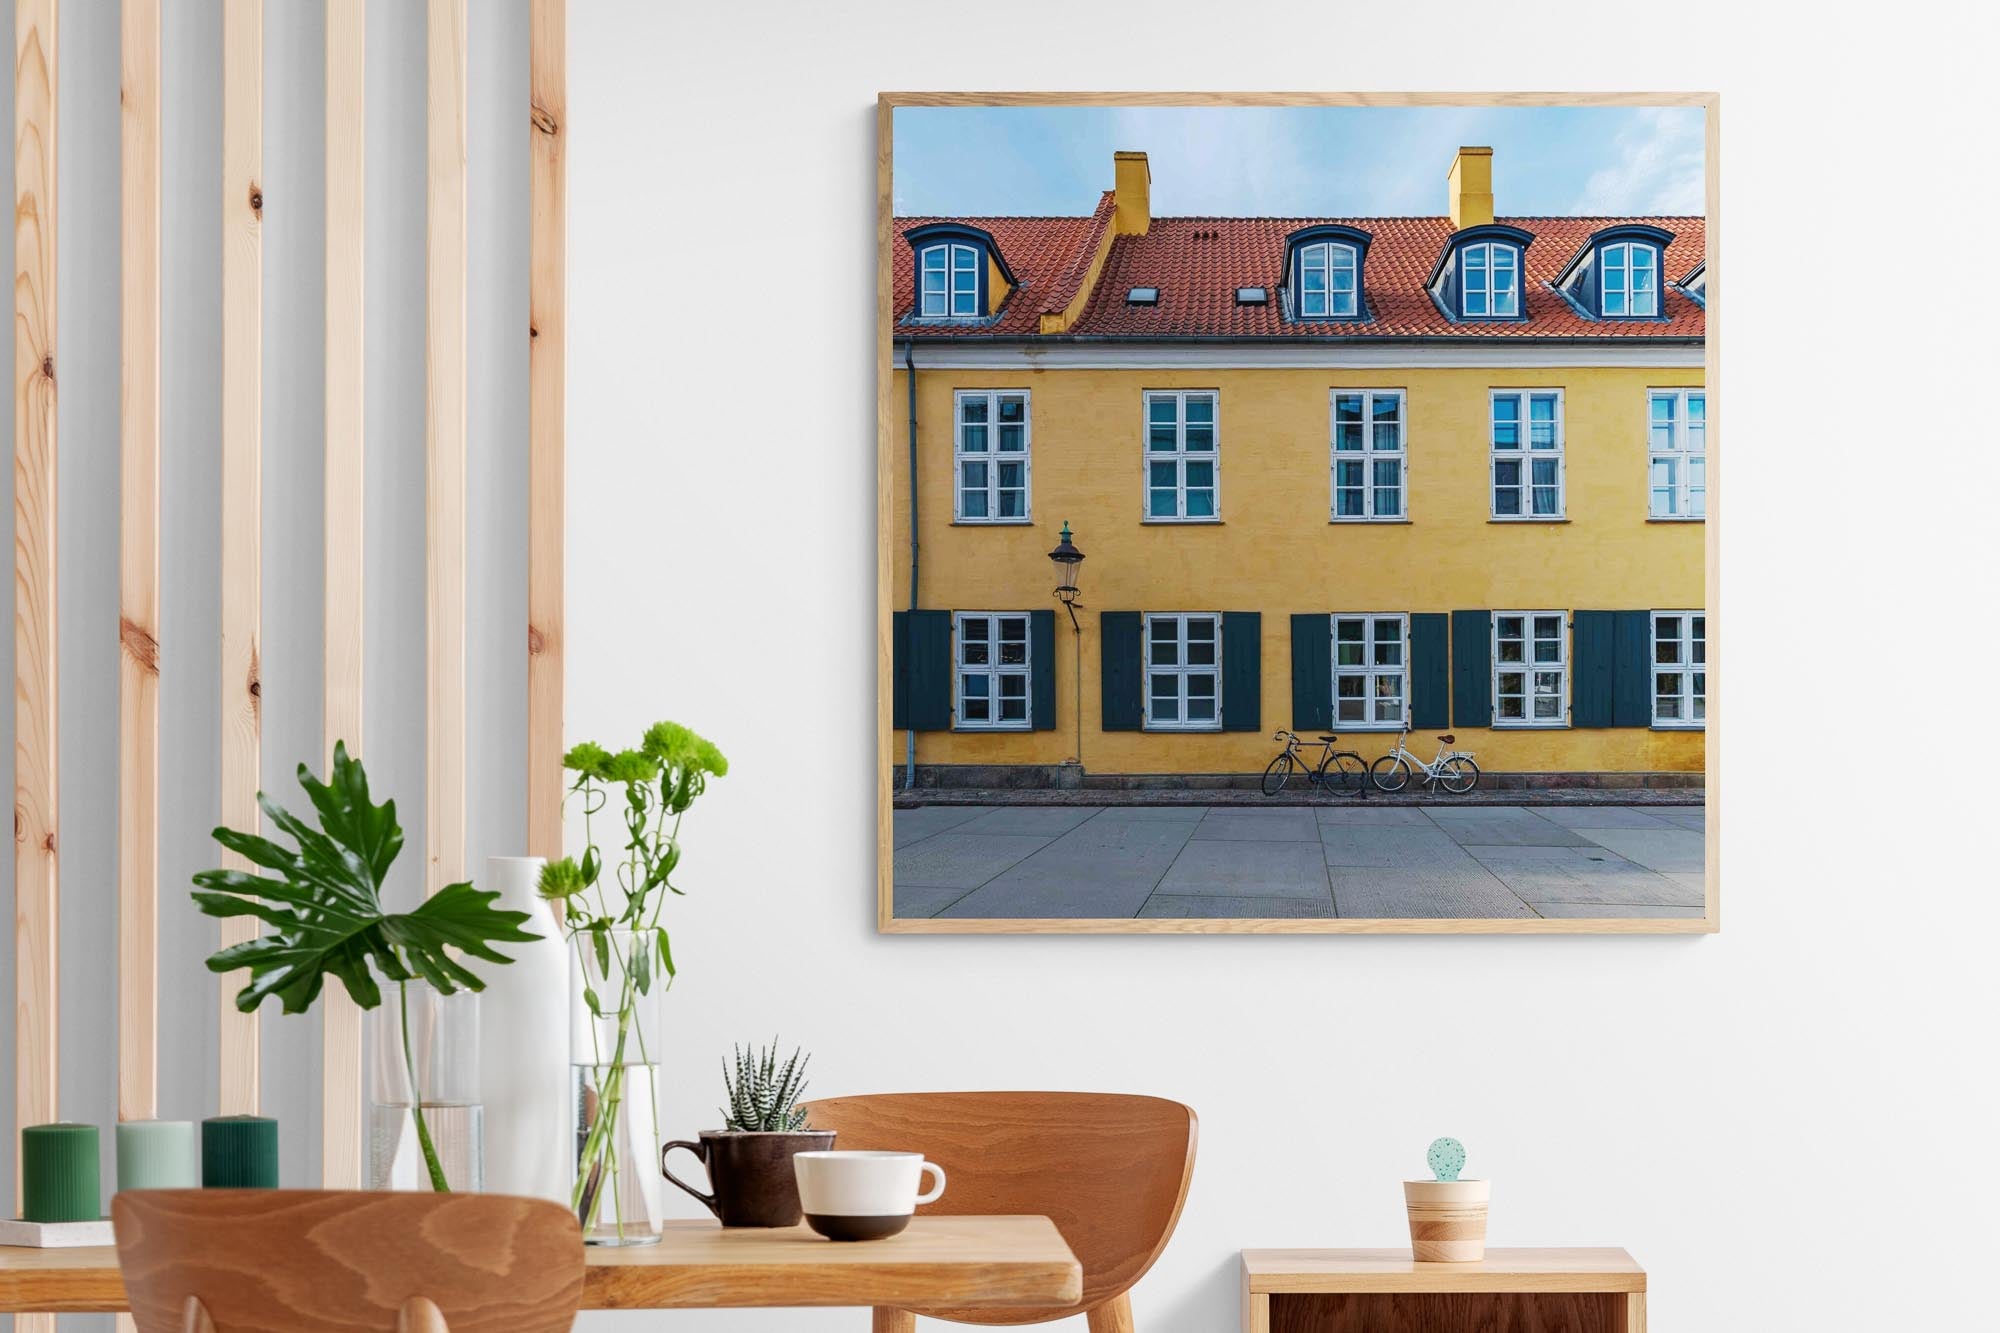 "Colorful image of a yellow building with green shutters and a bicycle in front on a street in Copenhagen, Denmark."